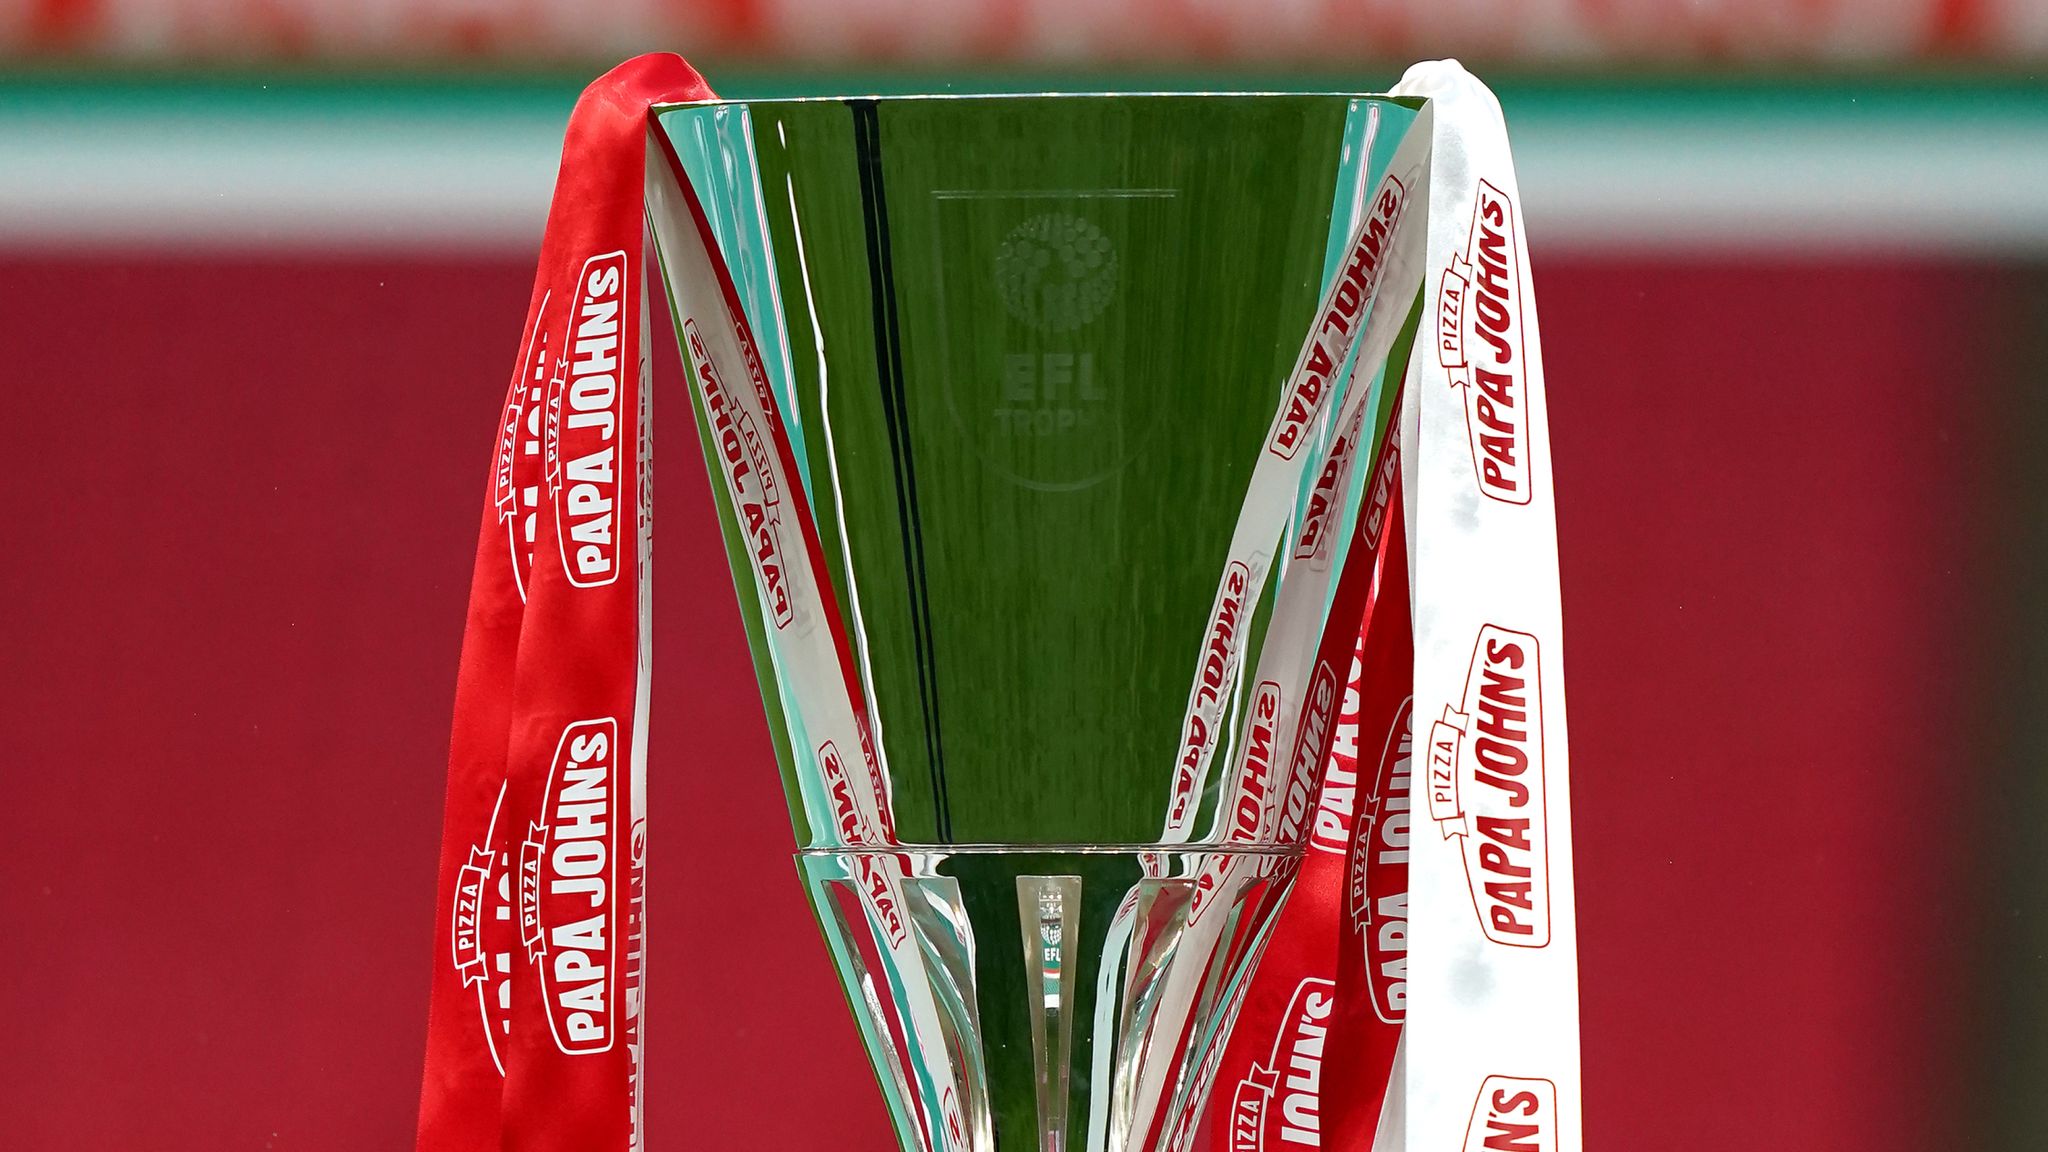 Papa John's Trophy: Fixtures and schedule for latter stages of 2021/22